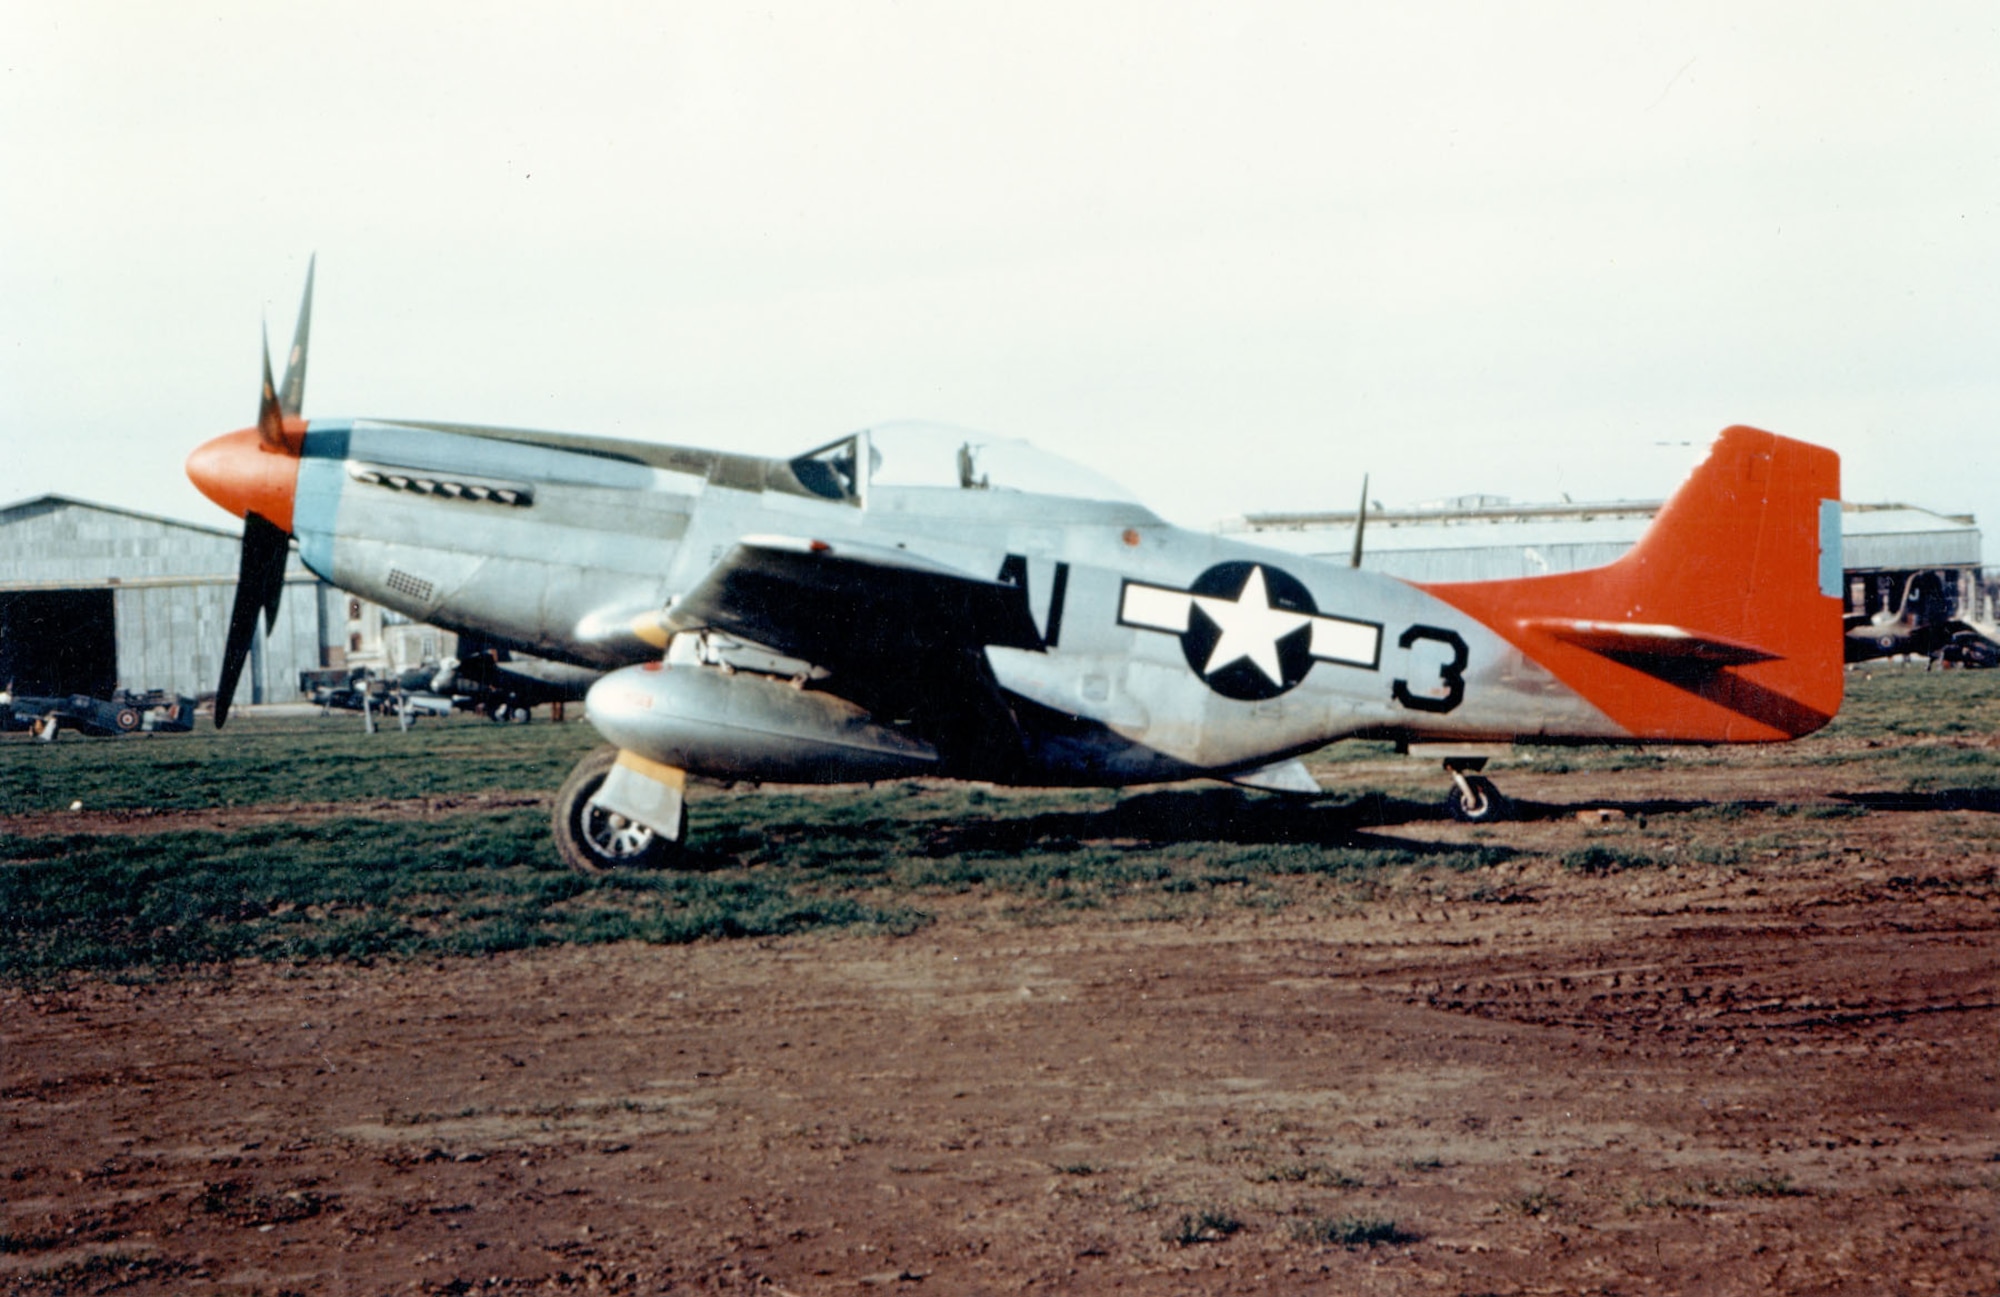 The 332nd’s aircraft had distinctive markings that gave them the name “Red Tails.” (U.S. Air Force photo)